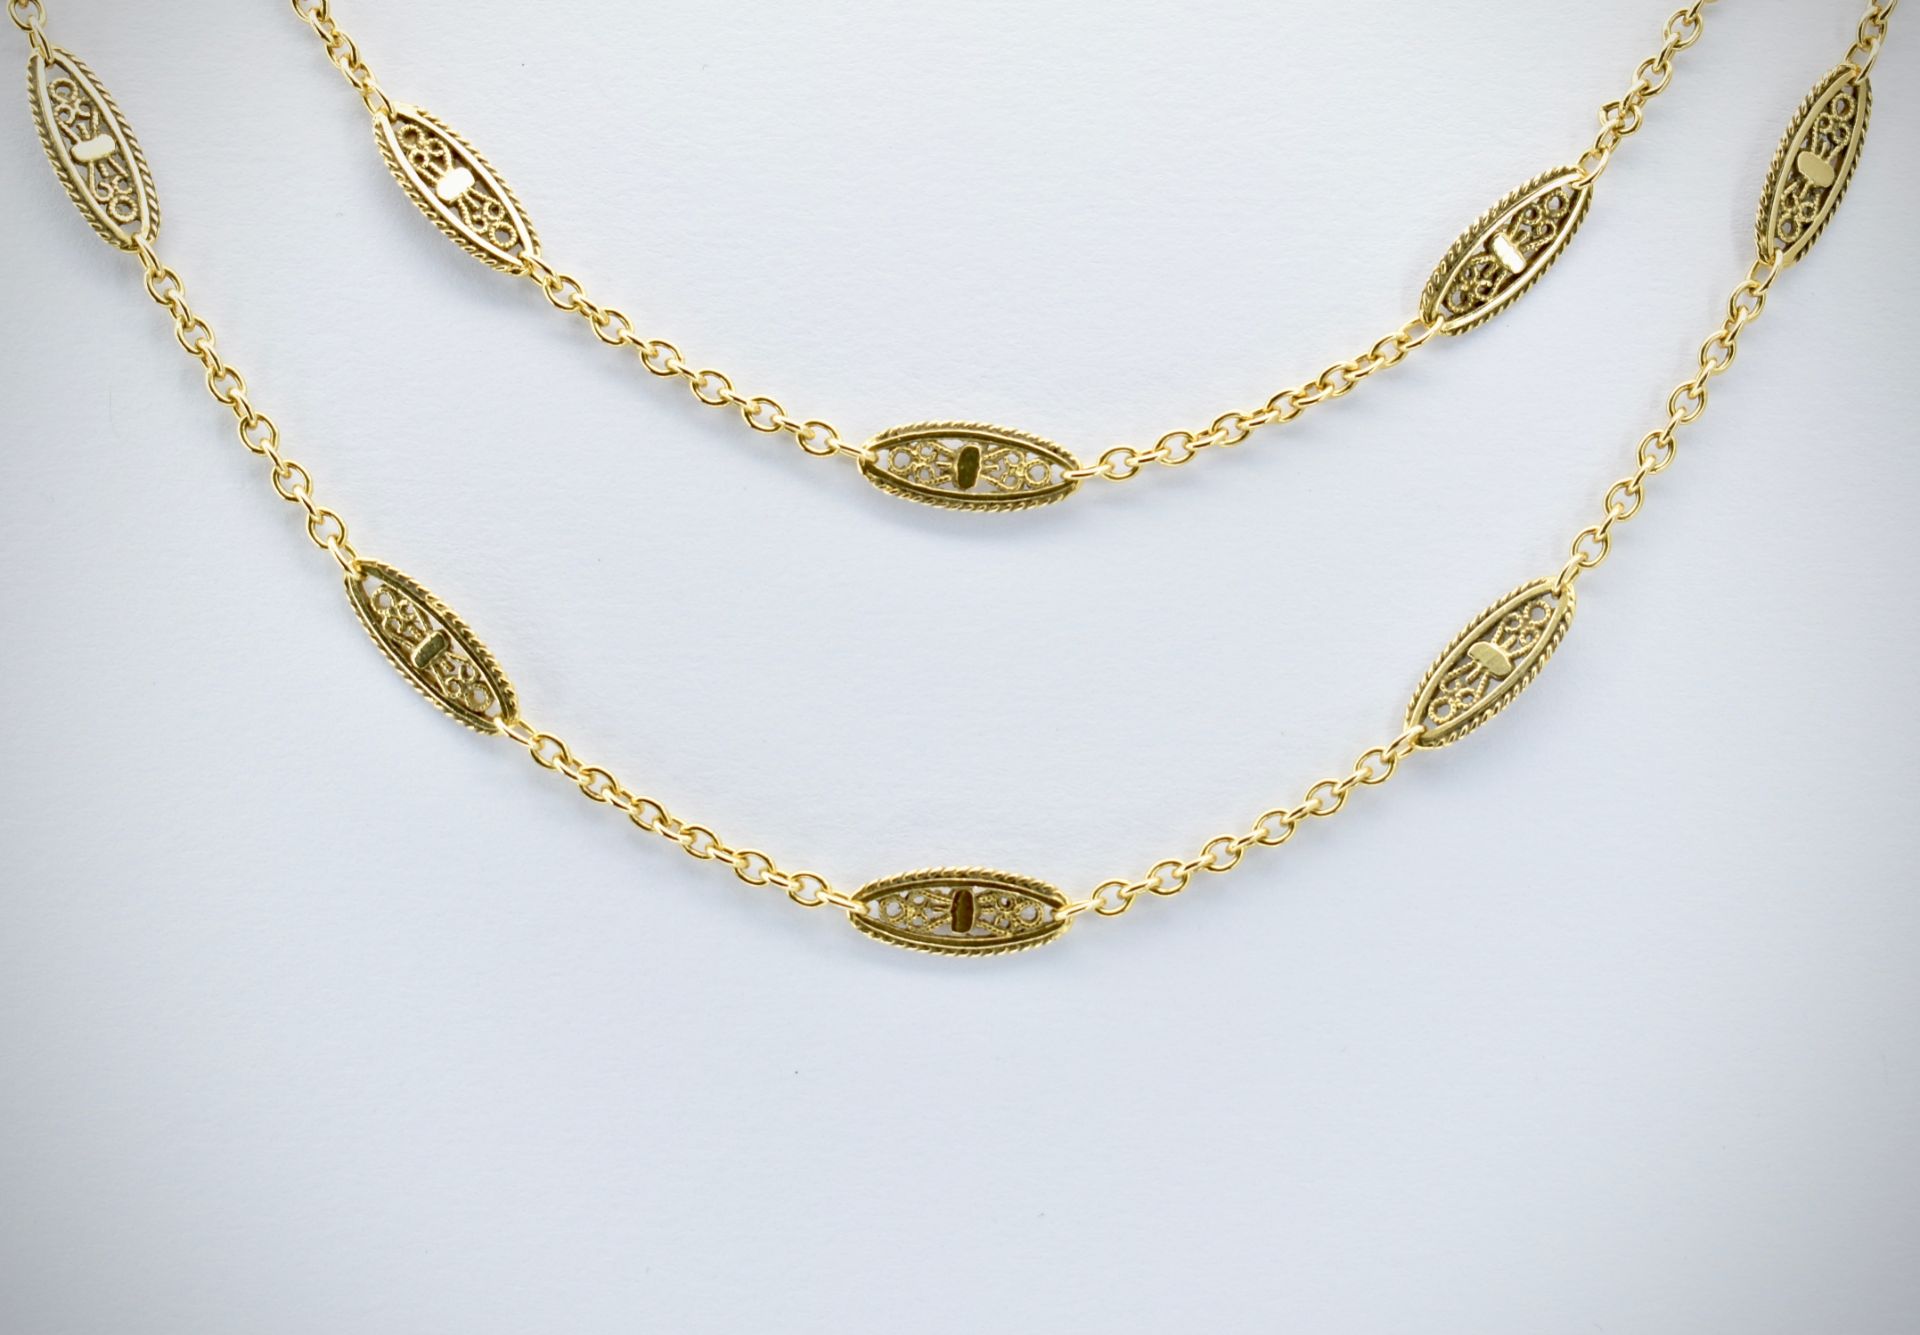 French 18ct Gold Antique Long Chain - Image 3 of 4